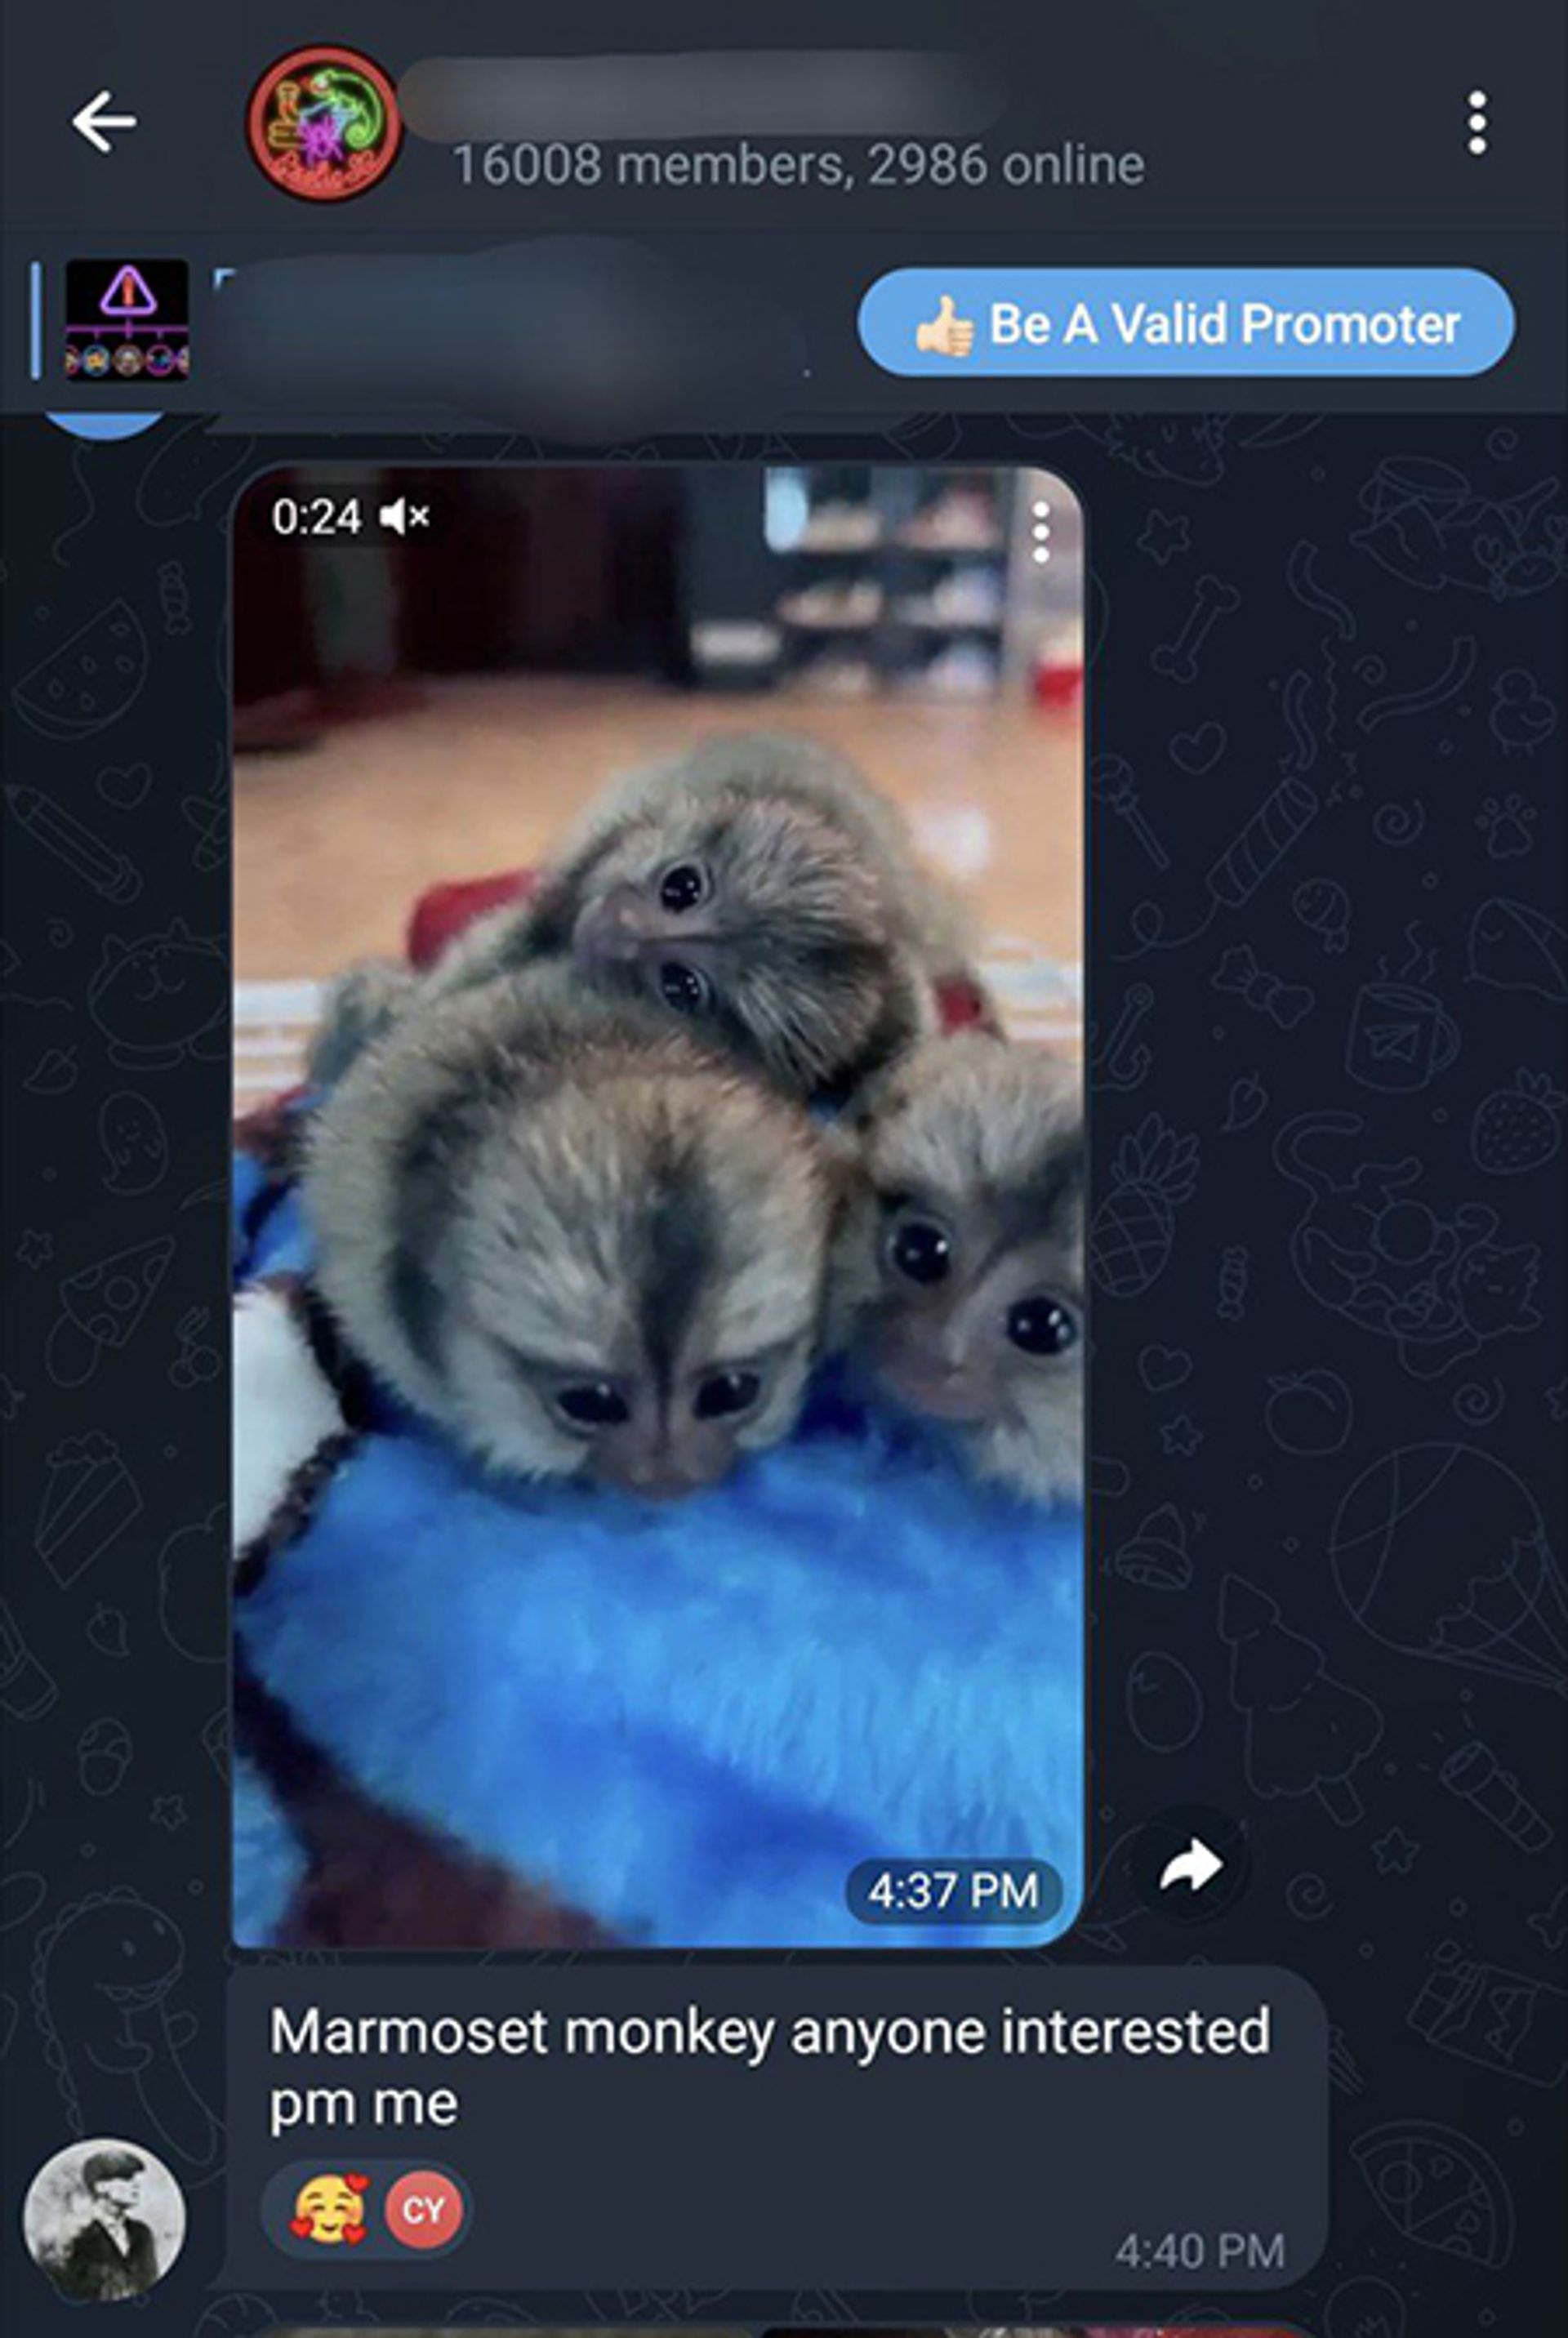 The biggest group on Telegram tracked by this reporter. It has more than 16,000 members illegally selling banned animals, including marmoset monkeys and tortoises, in Singapore. PHOTO: SCREENGRAB FROM TELEGRAM